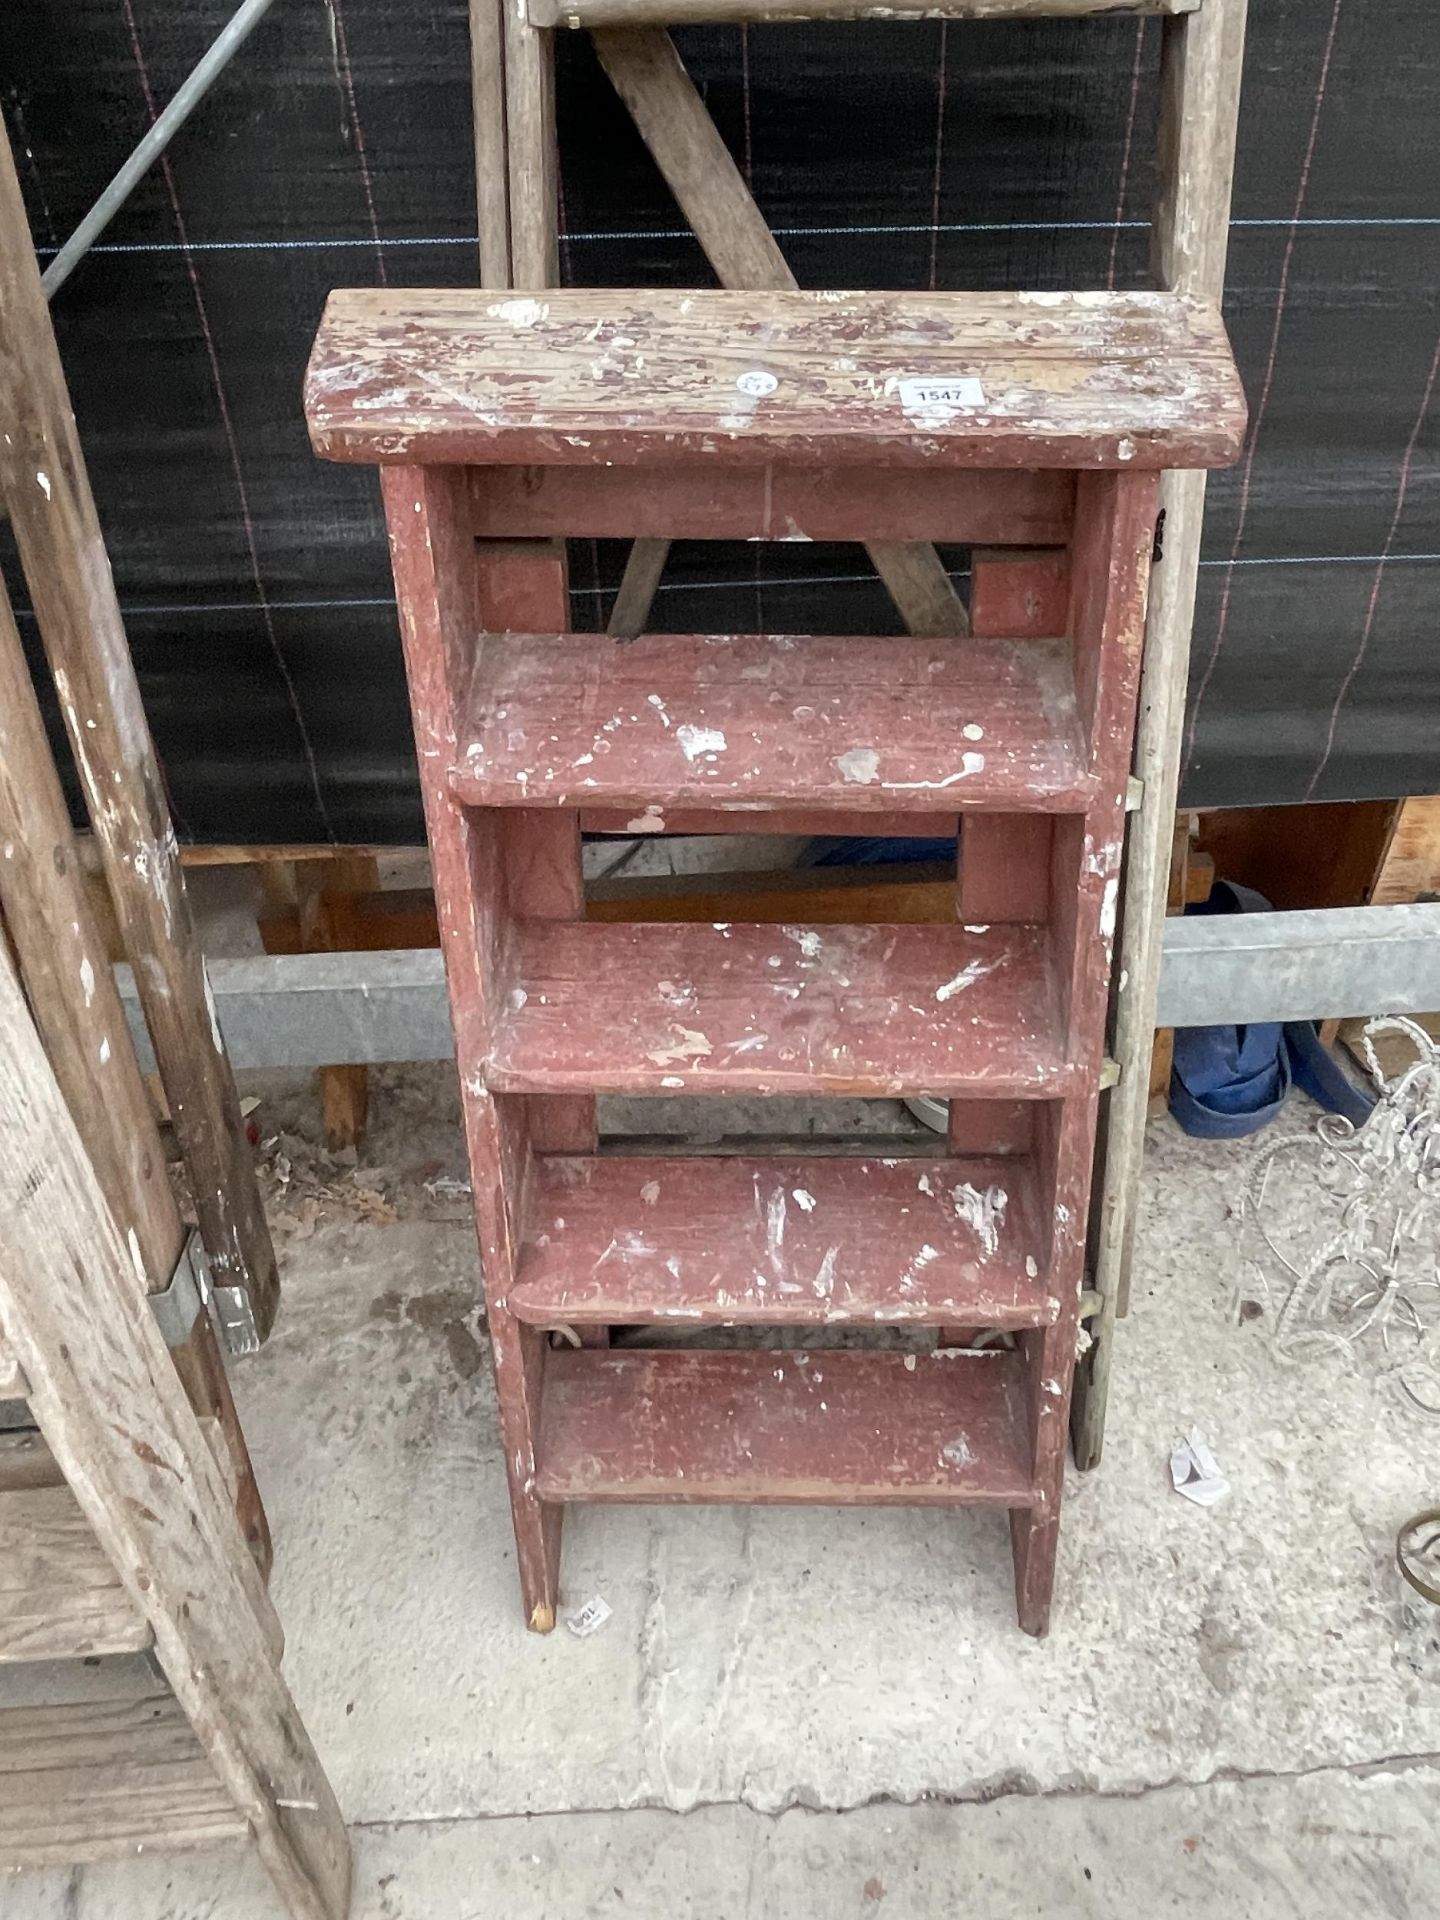 A VINTAGE FIVE RUNG WOODEN STEP LADDER AND A FURTHER FOUR RUNG WOODEN STEP LADDER - Image 2 of 3